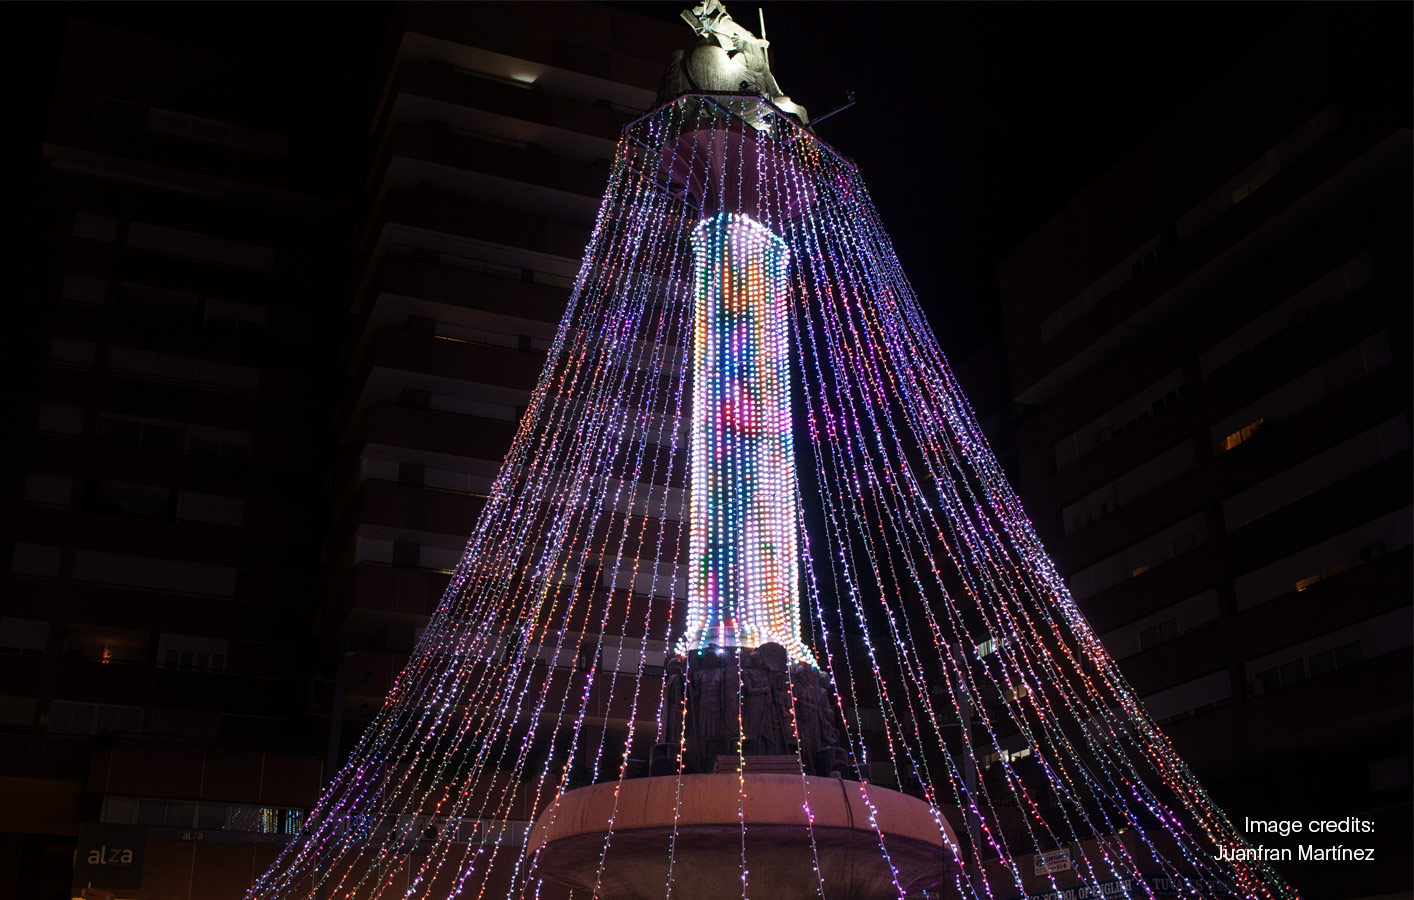 30,000 LED lights powered by disguise illuminate Christmas tree in Lorca, Spain